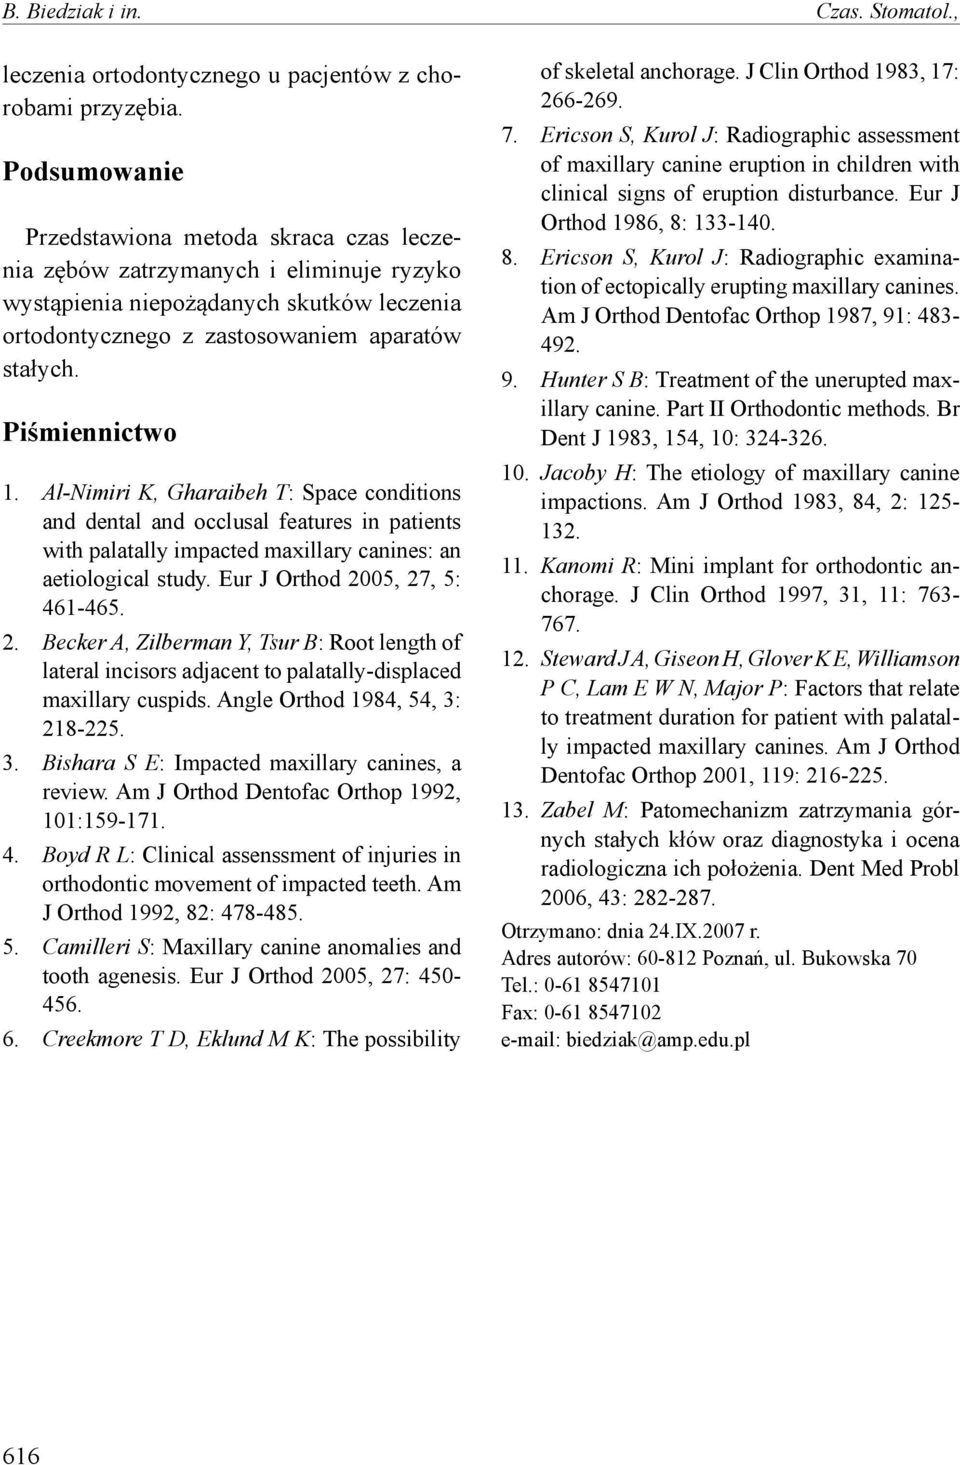 Piśmiennictwo 1. Al-Nimiri K, Gharaibeh T: Space conditions and dental and occlusal features in patients with palatally impacted maxillary canines: an aetiological study.